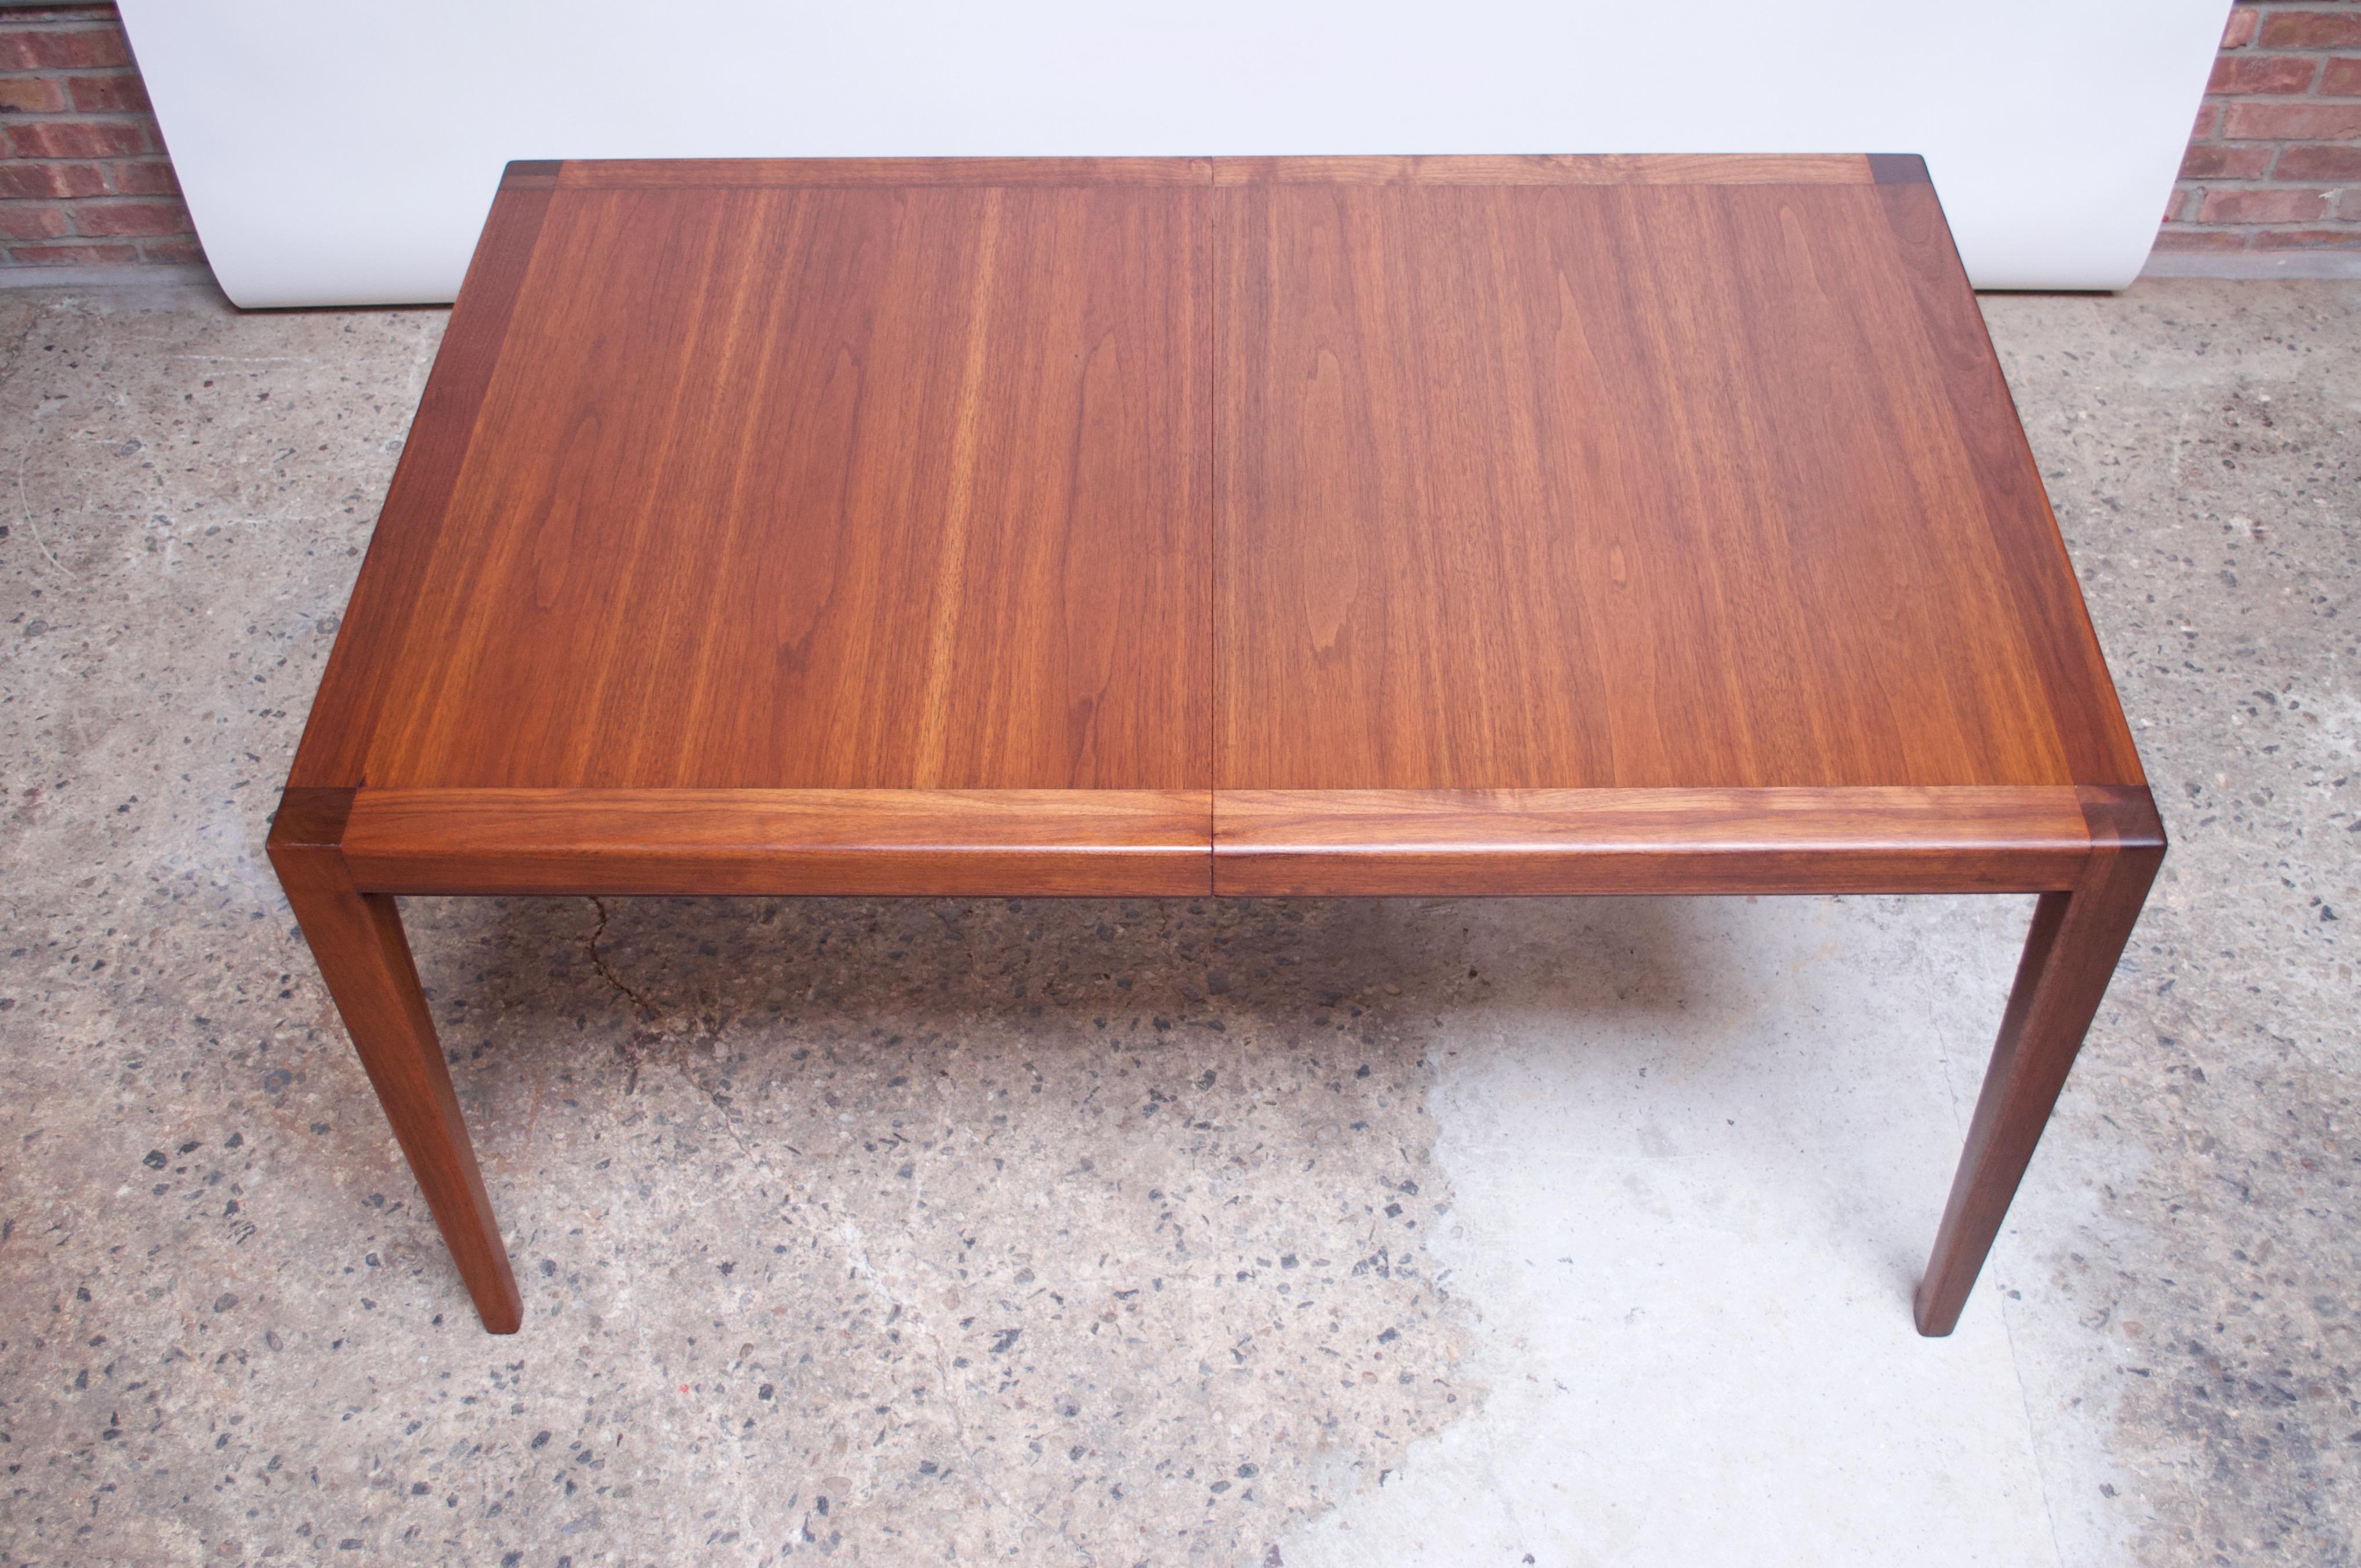 1950s walnut dining table manufactured by Red Lion Table Company of Pennsylvania. Minimal, clean lines enhanced by dense, sculpted legs. Rails have been replaced to allow the table to pull open easily and seamlessly to insert the leaves (2 in total